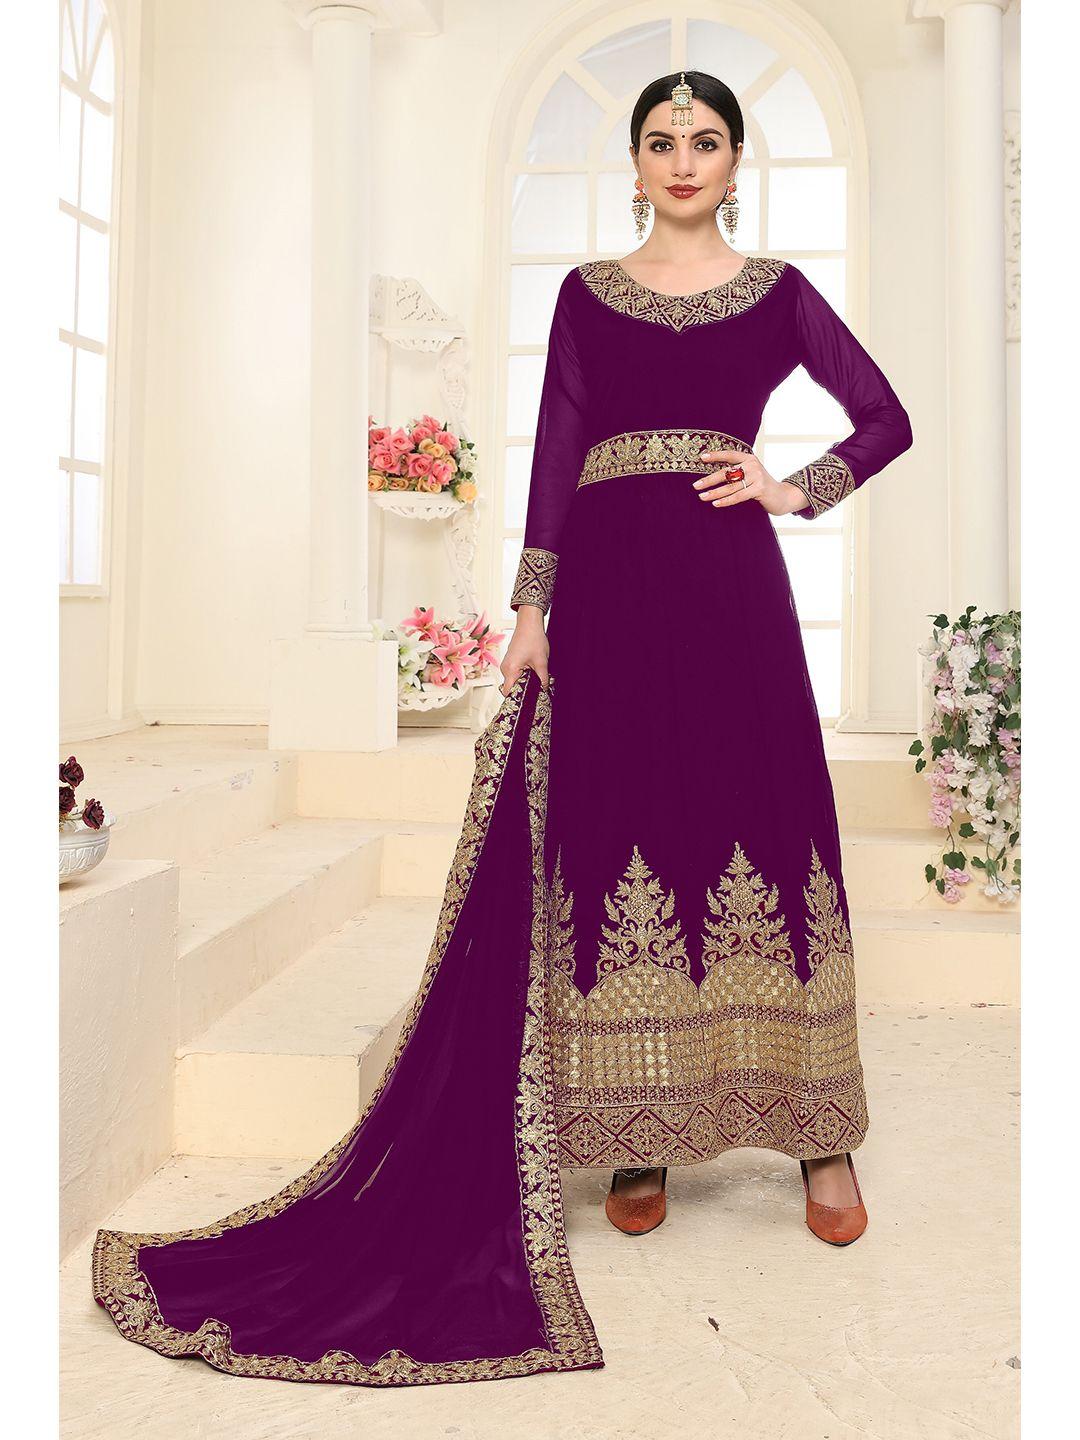 divine international trading co purple & gold-toned embroidered unstitched dress material